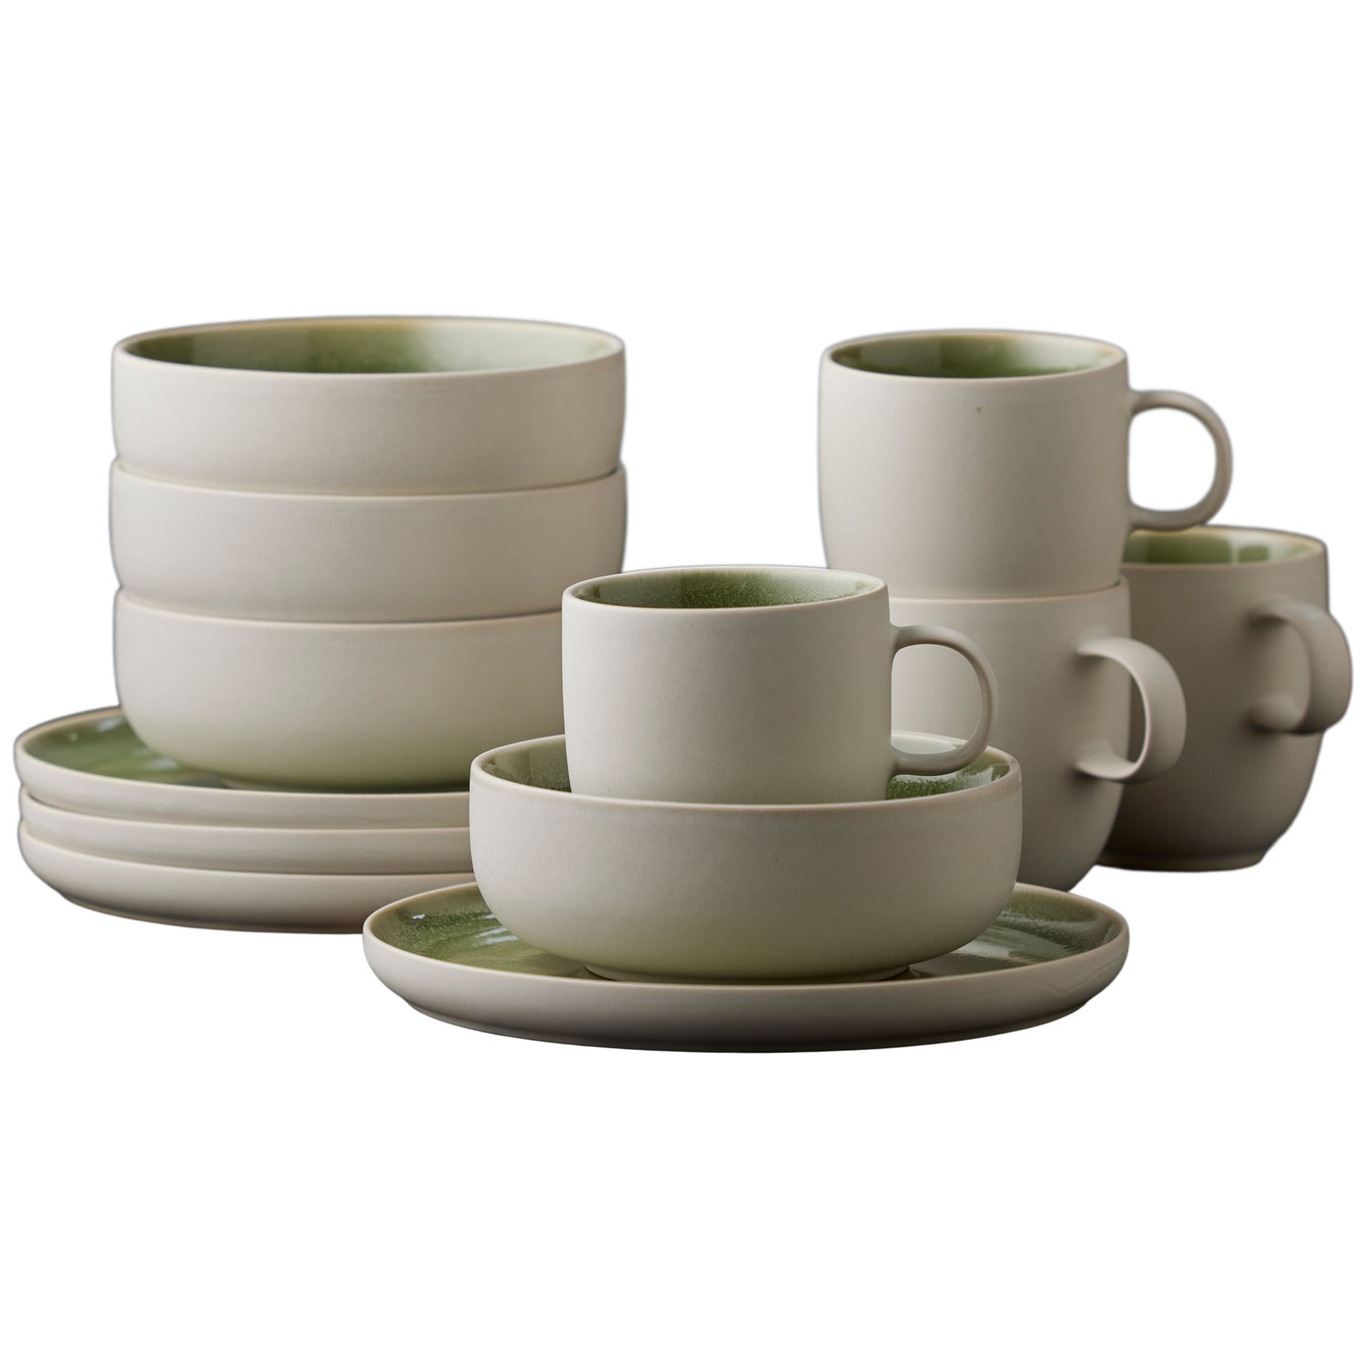 North Tableware Set 12 Pieces, Matte White/Shiny Moss